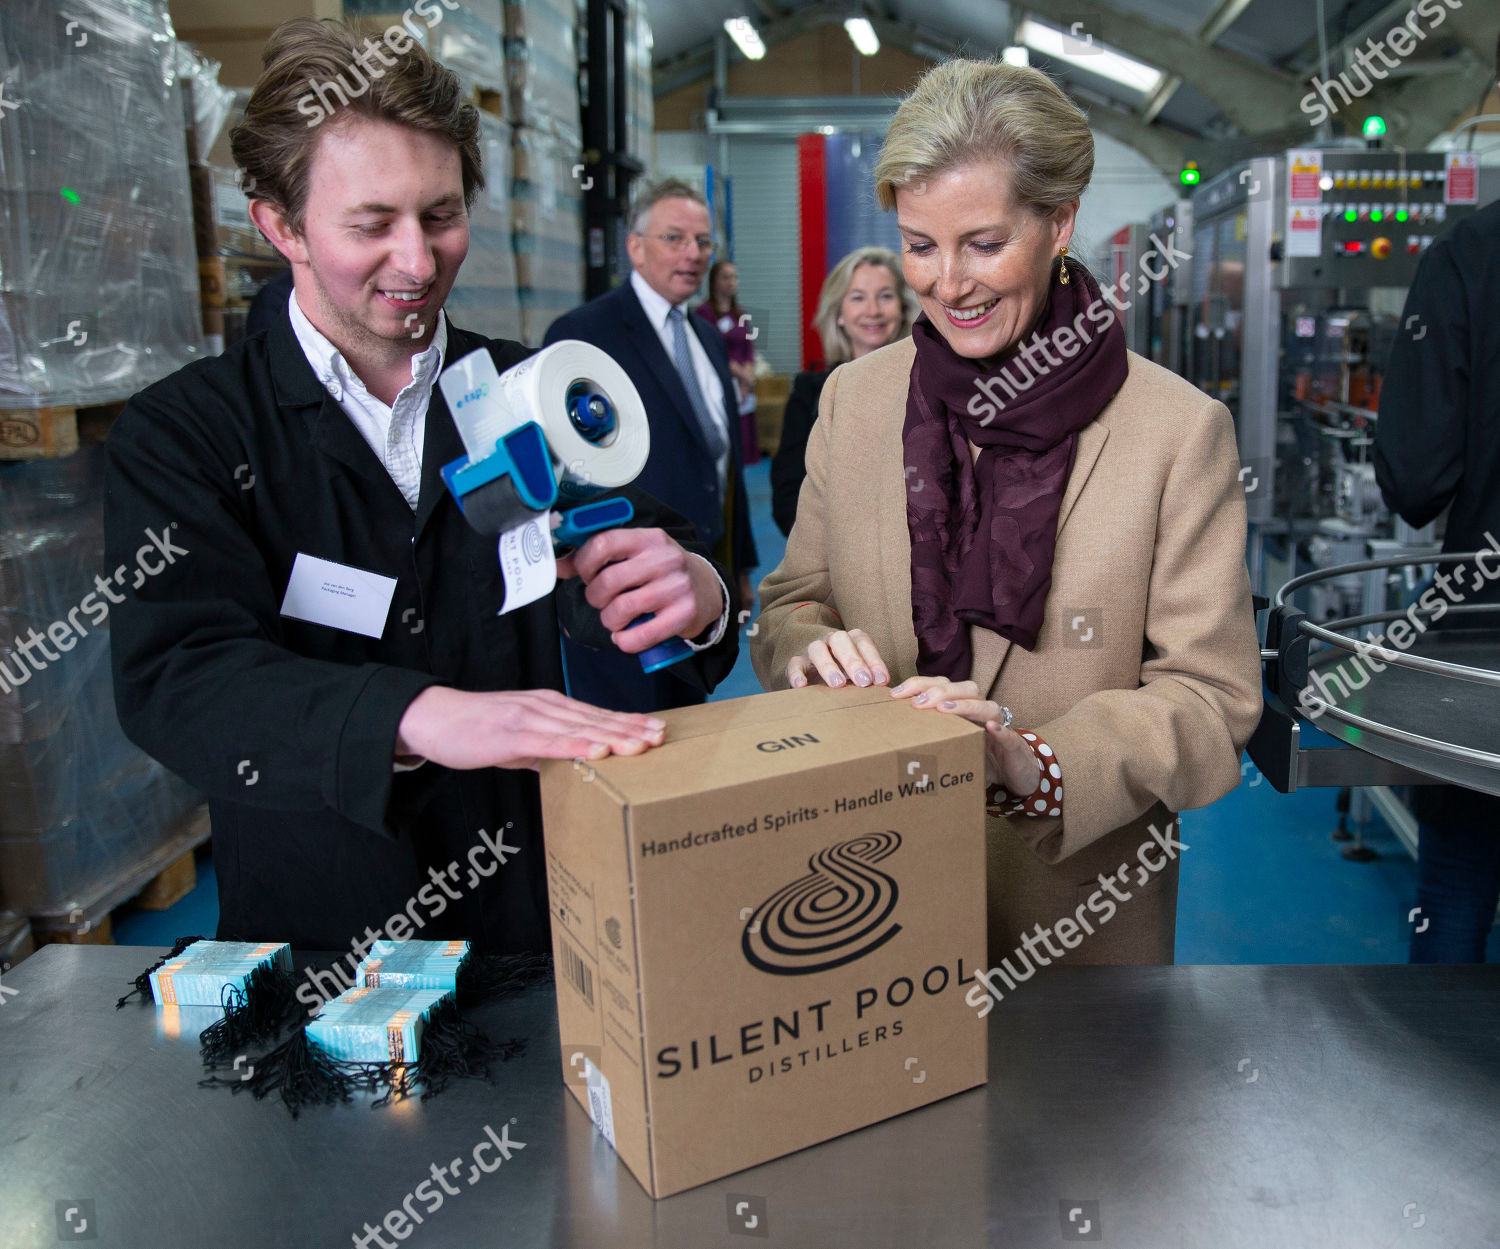 sophie-countess-of-wessex-visit-to-silent-pool-distillery-albury-uk-shutterstock-editorial-10123902ac.jpg